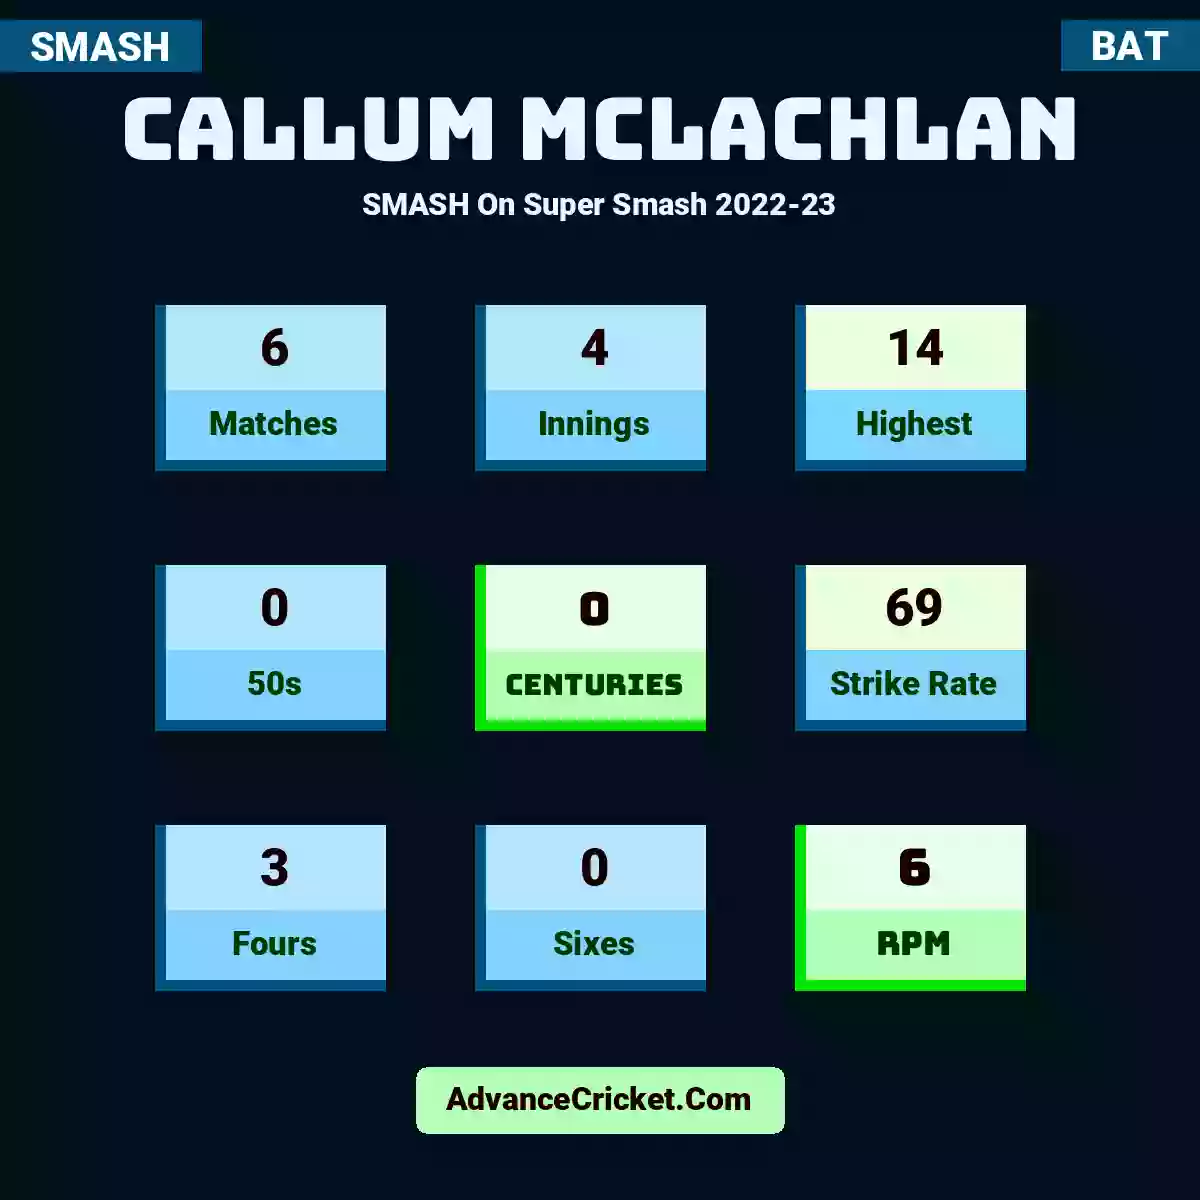 Callum McLachlan SMASH  On Super Smash 2022-23, Callum McLachlan played 6 matches, scored 14 runs as highest, 0 half-centuries, and 0 centuries, with a strike rate of 69. C.McLachlan hit 3 fours and 0 sixes, with an RPM of 6.